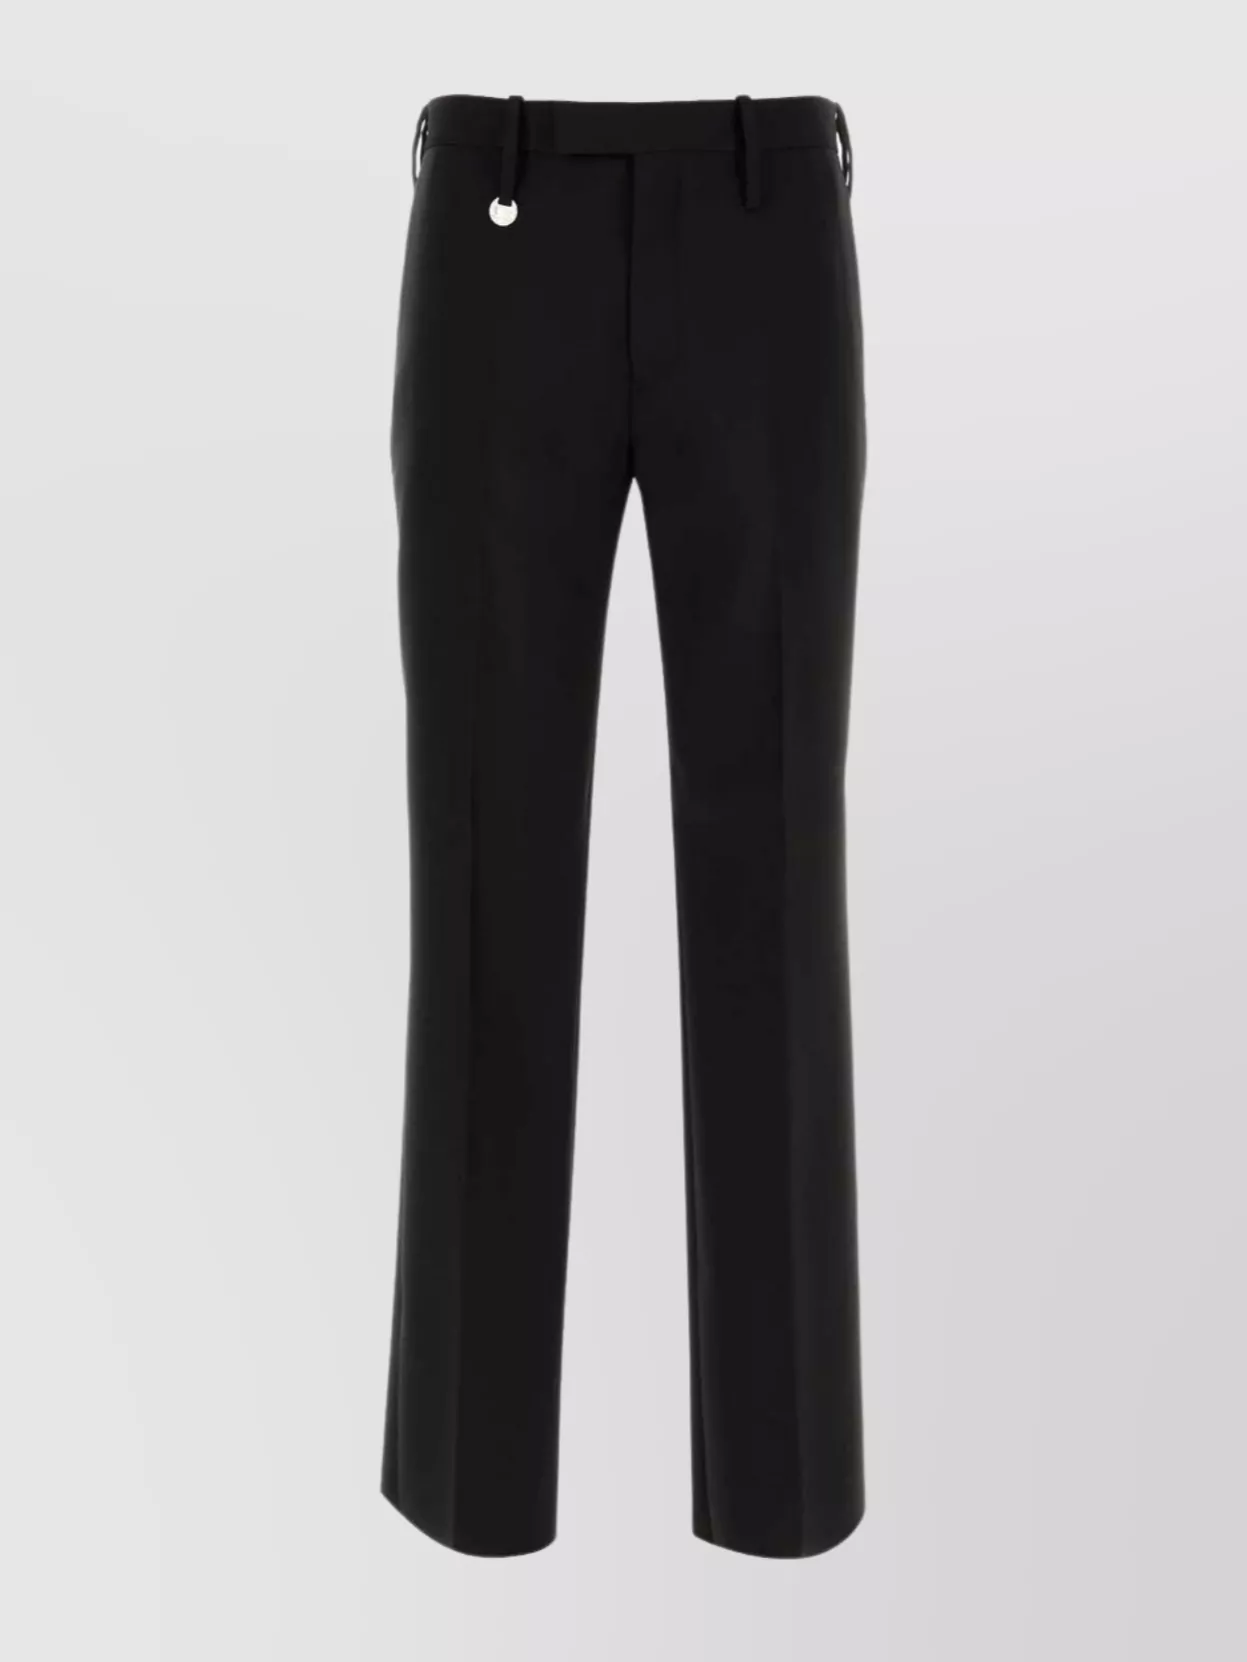 Shop Burberry Wool Trousers With Back Pockets And Belt Loops